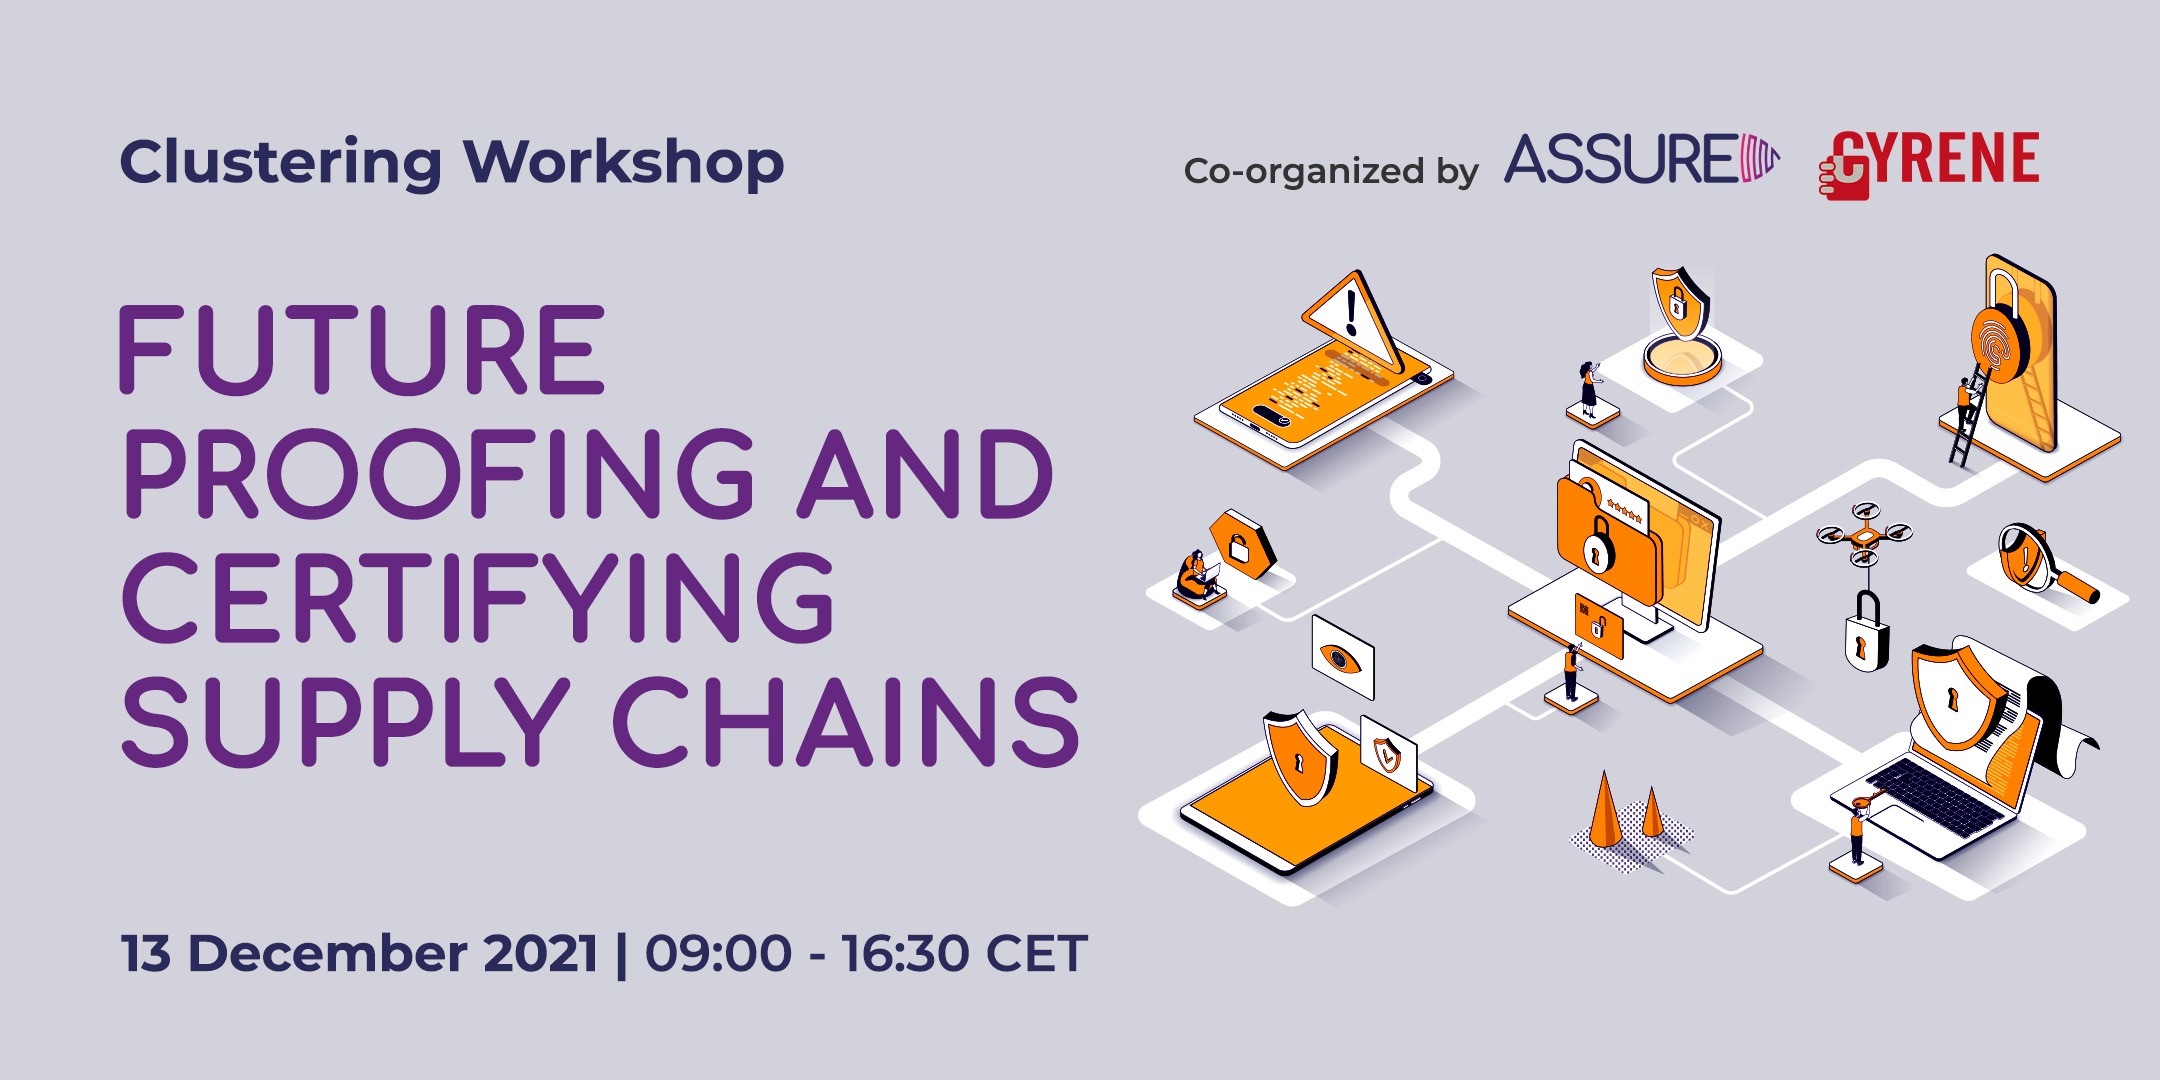 Future Proofing and Certifying Supply Chains | ASSURED CYRENE | Clustering Workshop